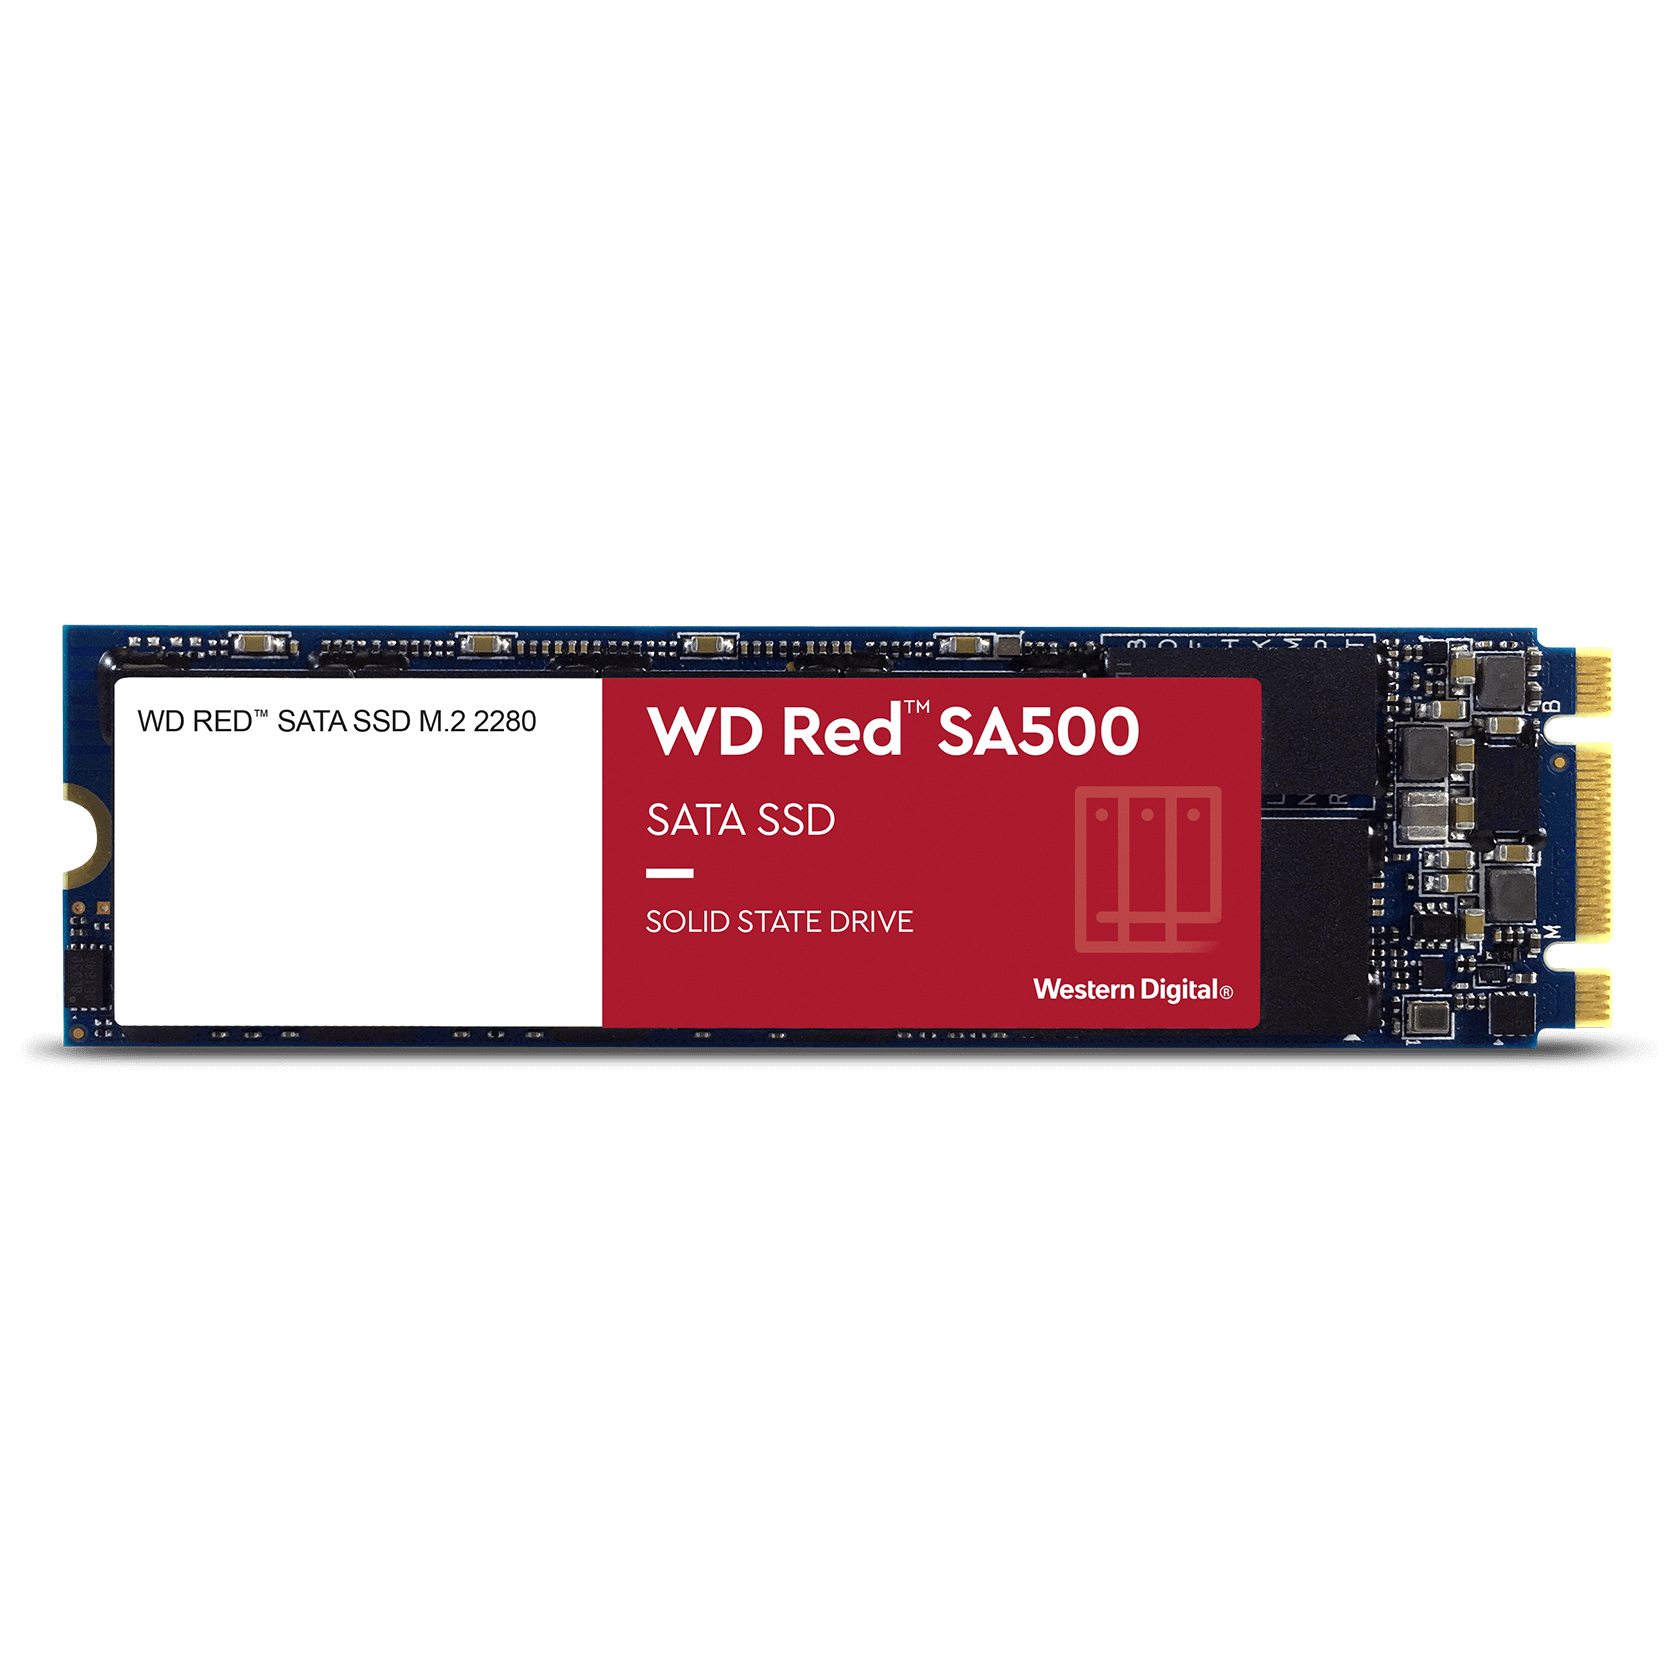 WD 500GB WD Red SA500 NAS 3D NAND Internal SSD - SATA III 6 Gb/s, 2.5"/7mm, Up to 560 MB/s